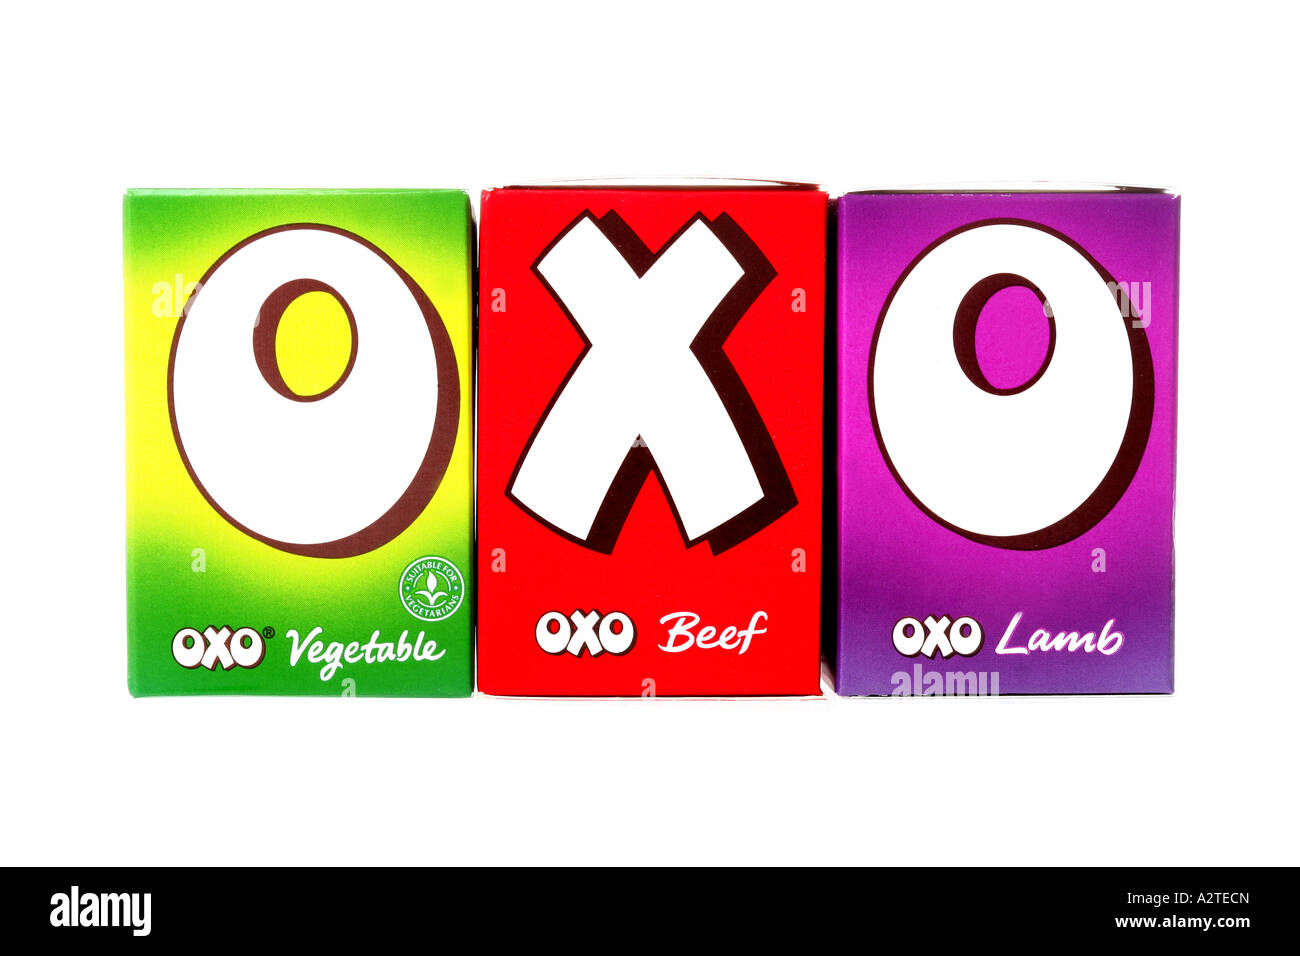 46 Oxo Cubes Images, Stock Photos, 3D objects, & Vectors